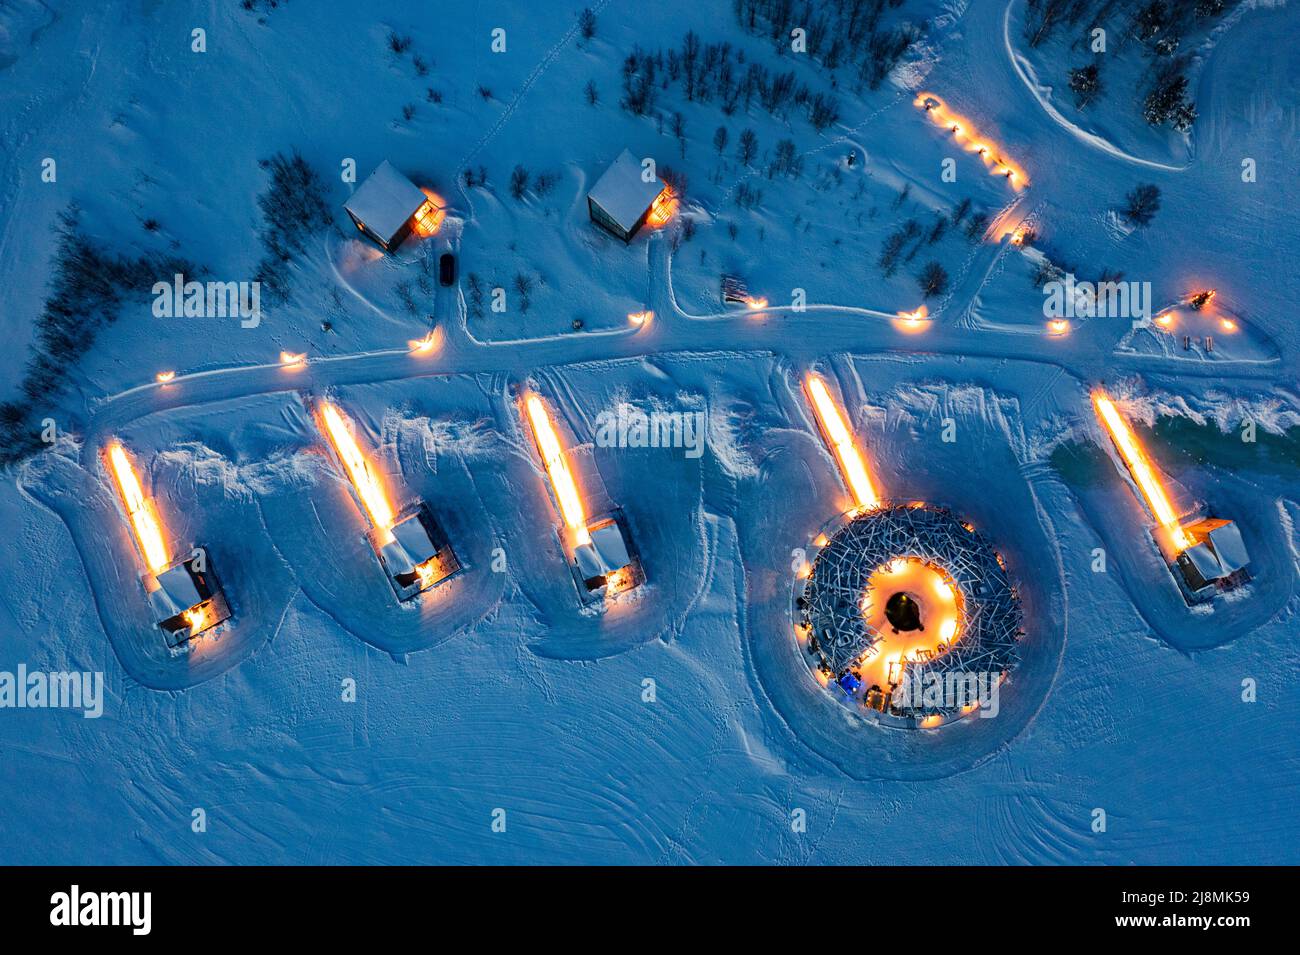 Aerial view of the illuminated Arctic Bath Hotel made with timber in the snowy landscape at dusk, Harads, Lapland, Sweden Stock Photo